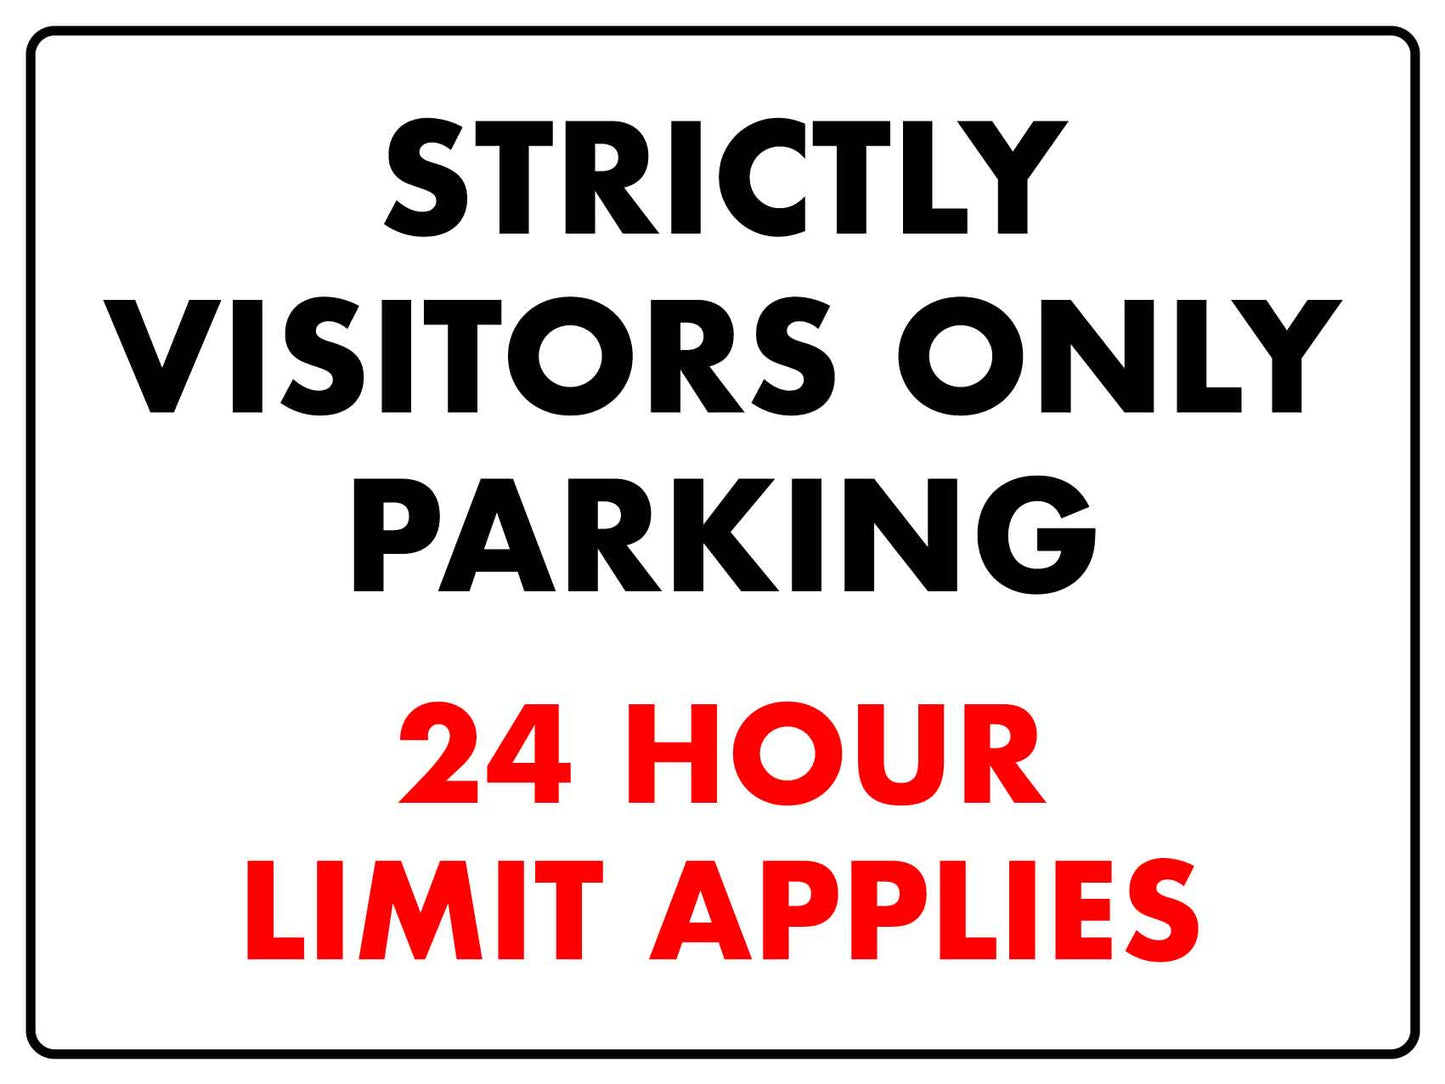 Strictly Visitors Only Parking 24 Hour Limit Applies Sign